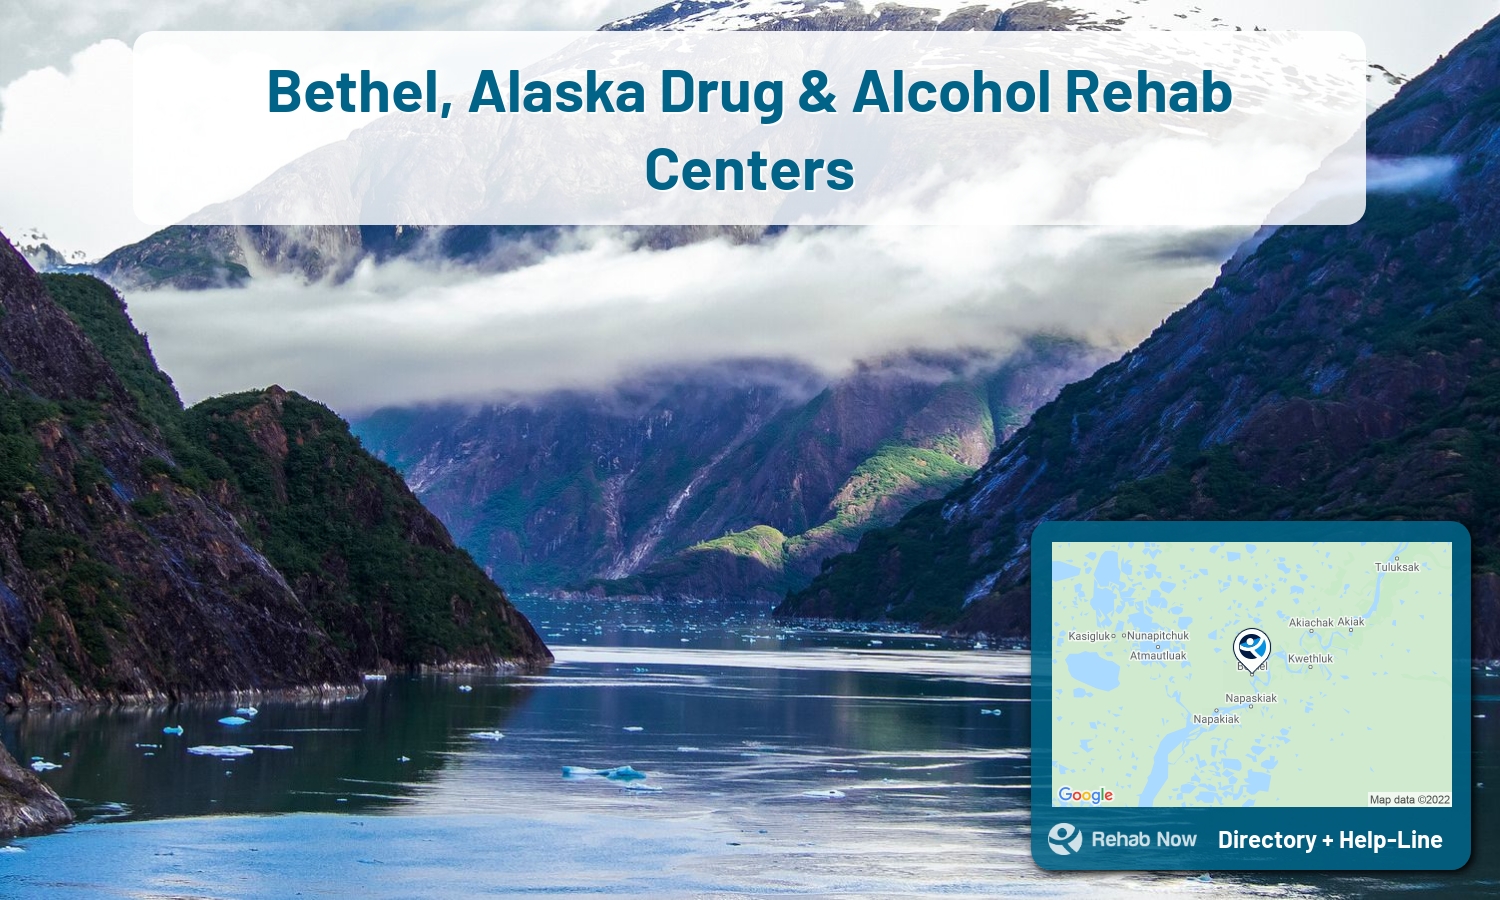 Bethel, AK Treatment Centers. Find drug rehab in Bethel, Alaska, or detox and treatment programs. Get the right help now!